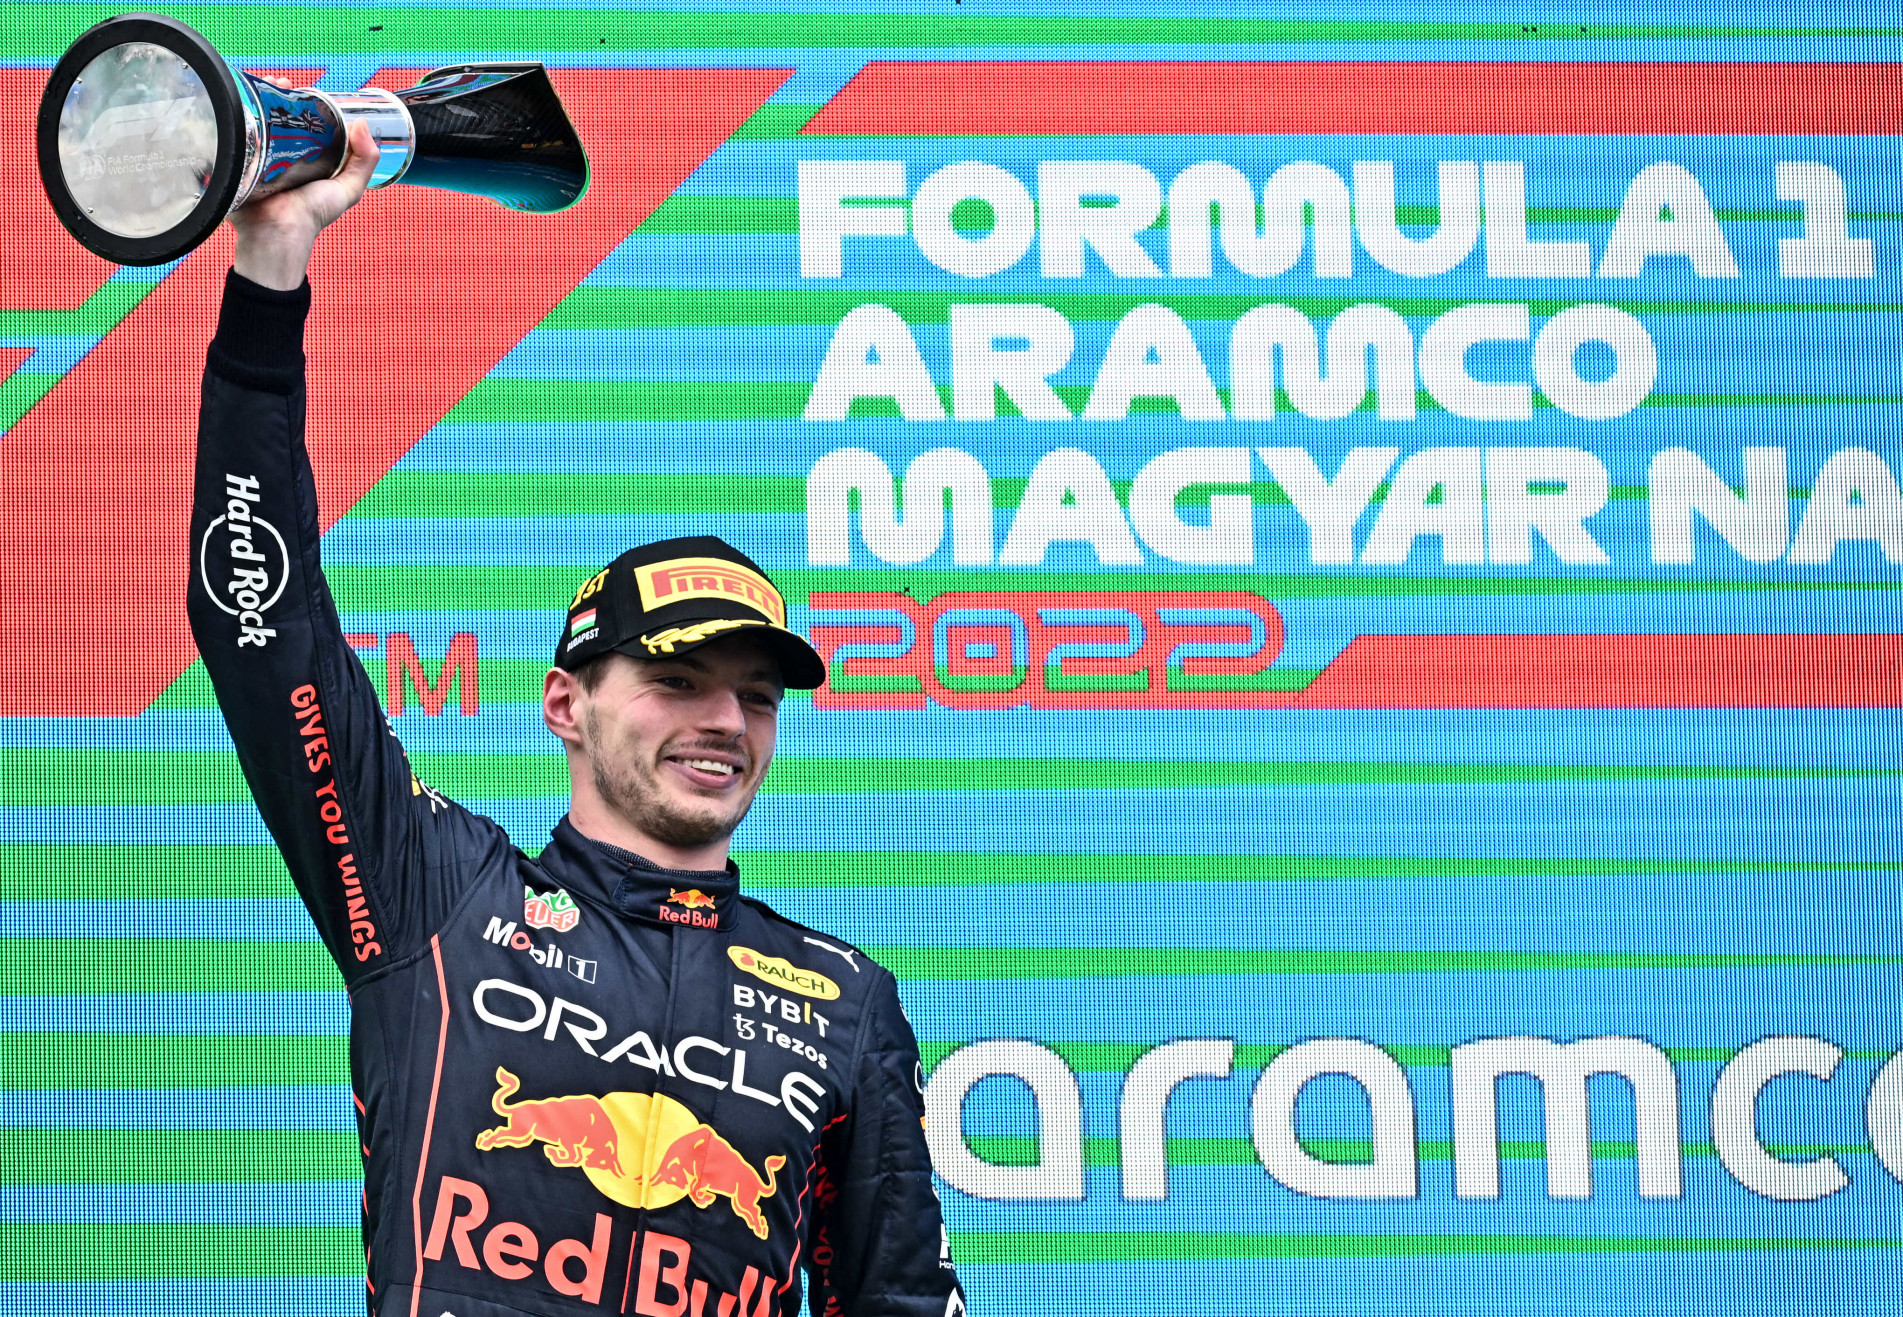  Winner Red Bull Racing's Dutch driver Max Verstappen celebrates with the trophy on the podium after the Formula One Hungarian Grand Prix at the Hungaroring in Mogyorod near Budapest, Hungary, on July 31, 2022. (Photo by Attila KISBENEDEK / AFP)
      